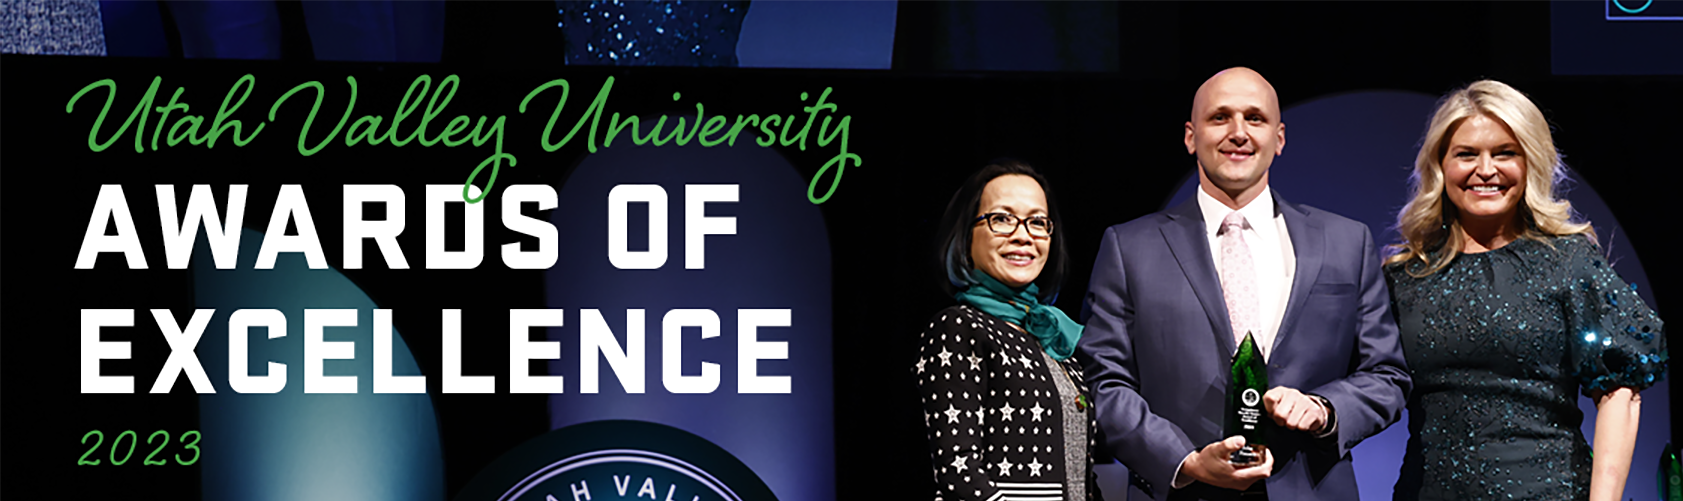 A Celebration of Excellence at UVU